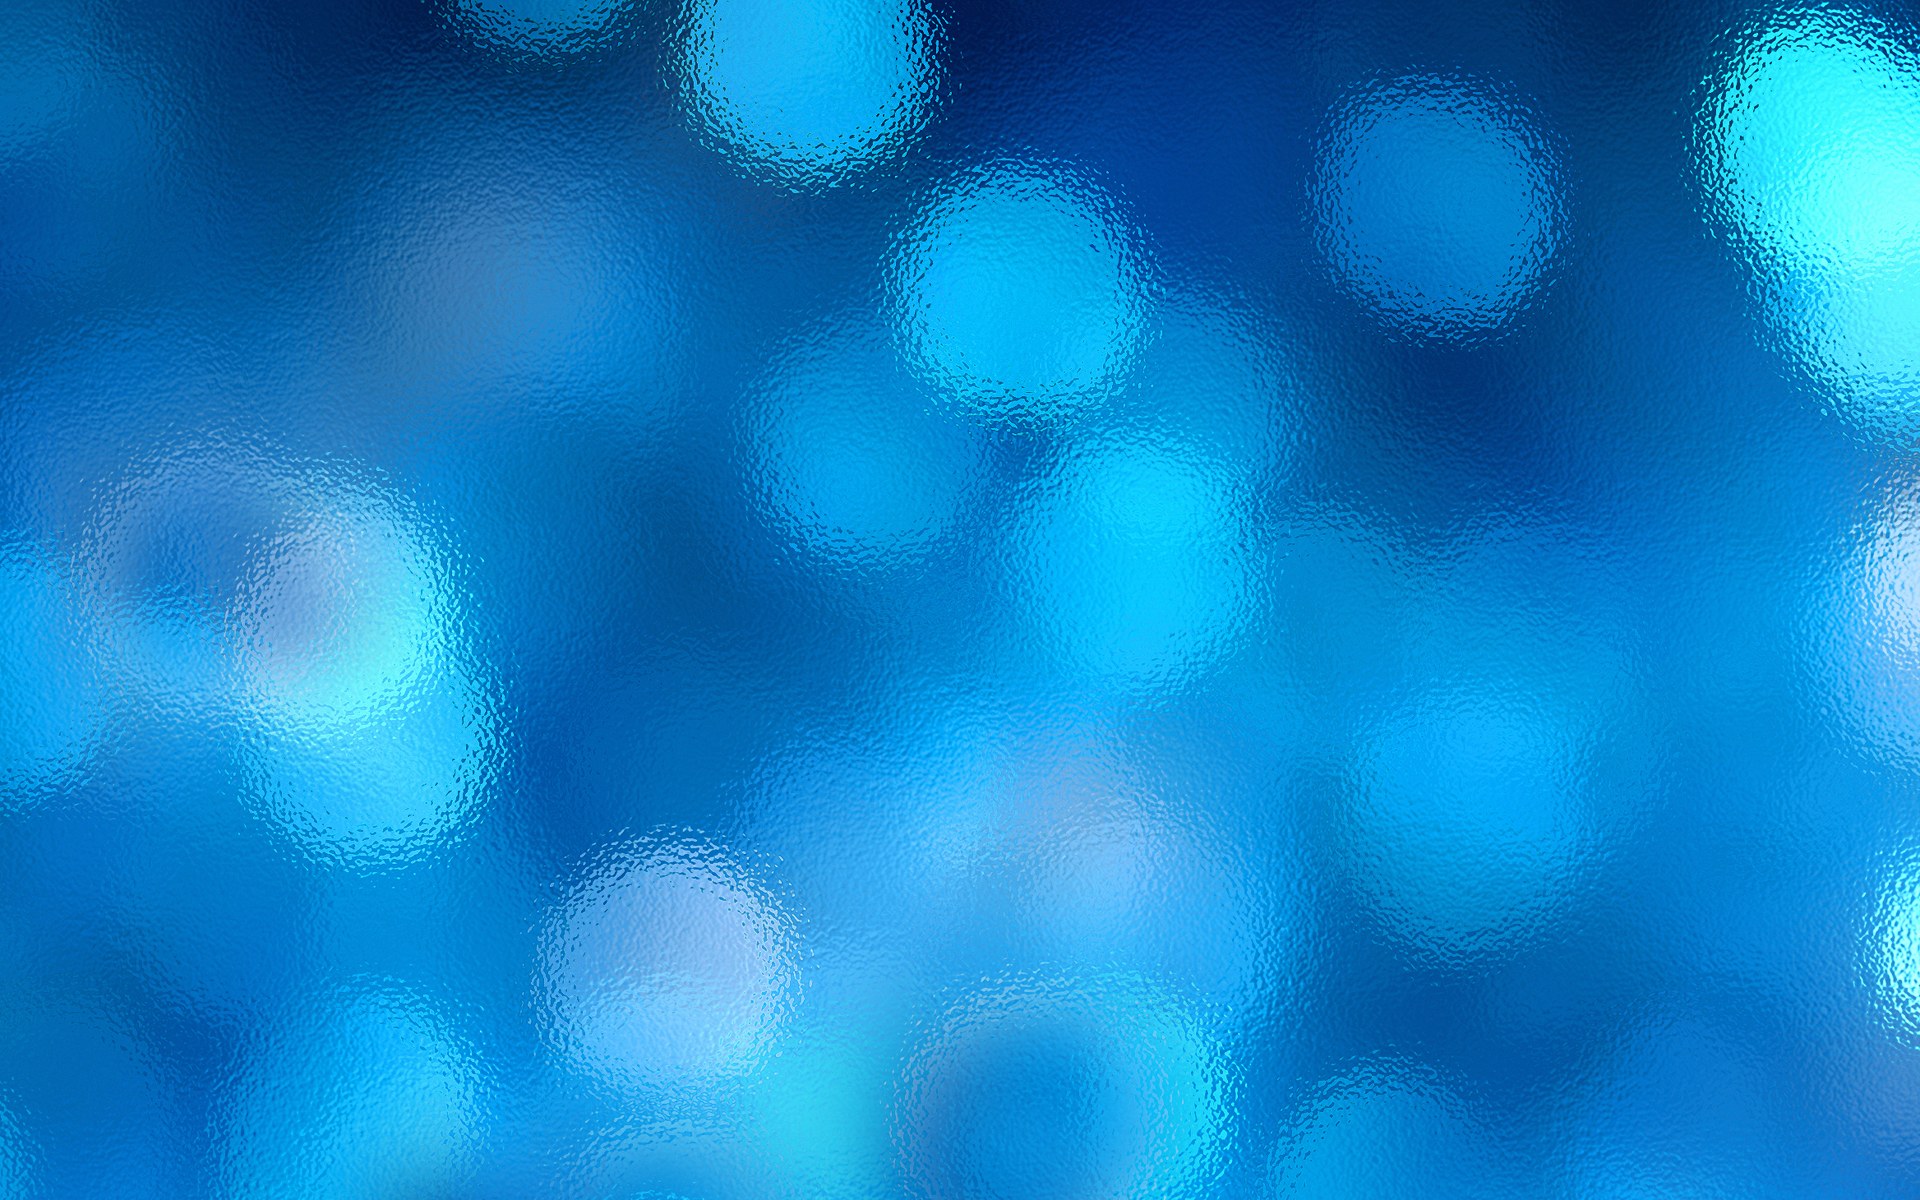  orgwp contentuploads201207Abstract Blue backgrounds 32jpg